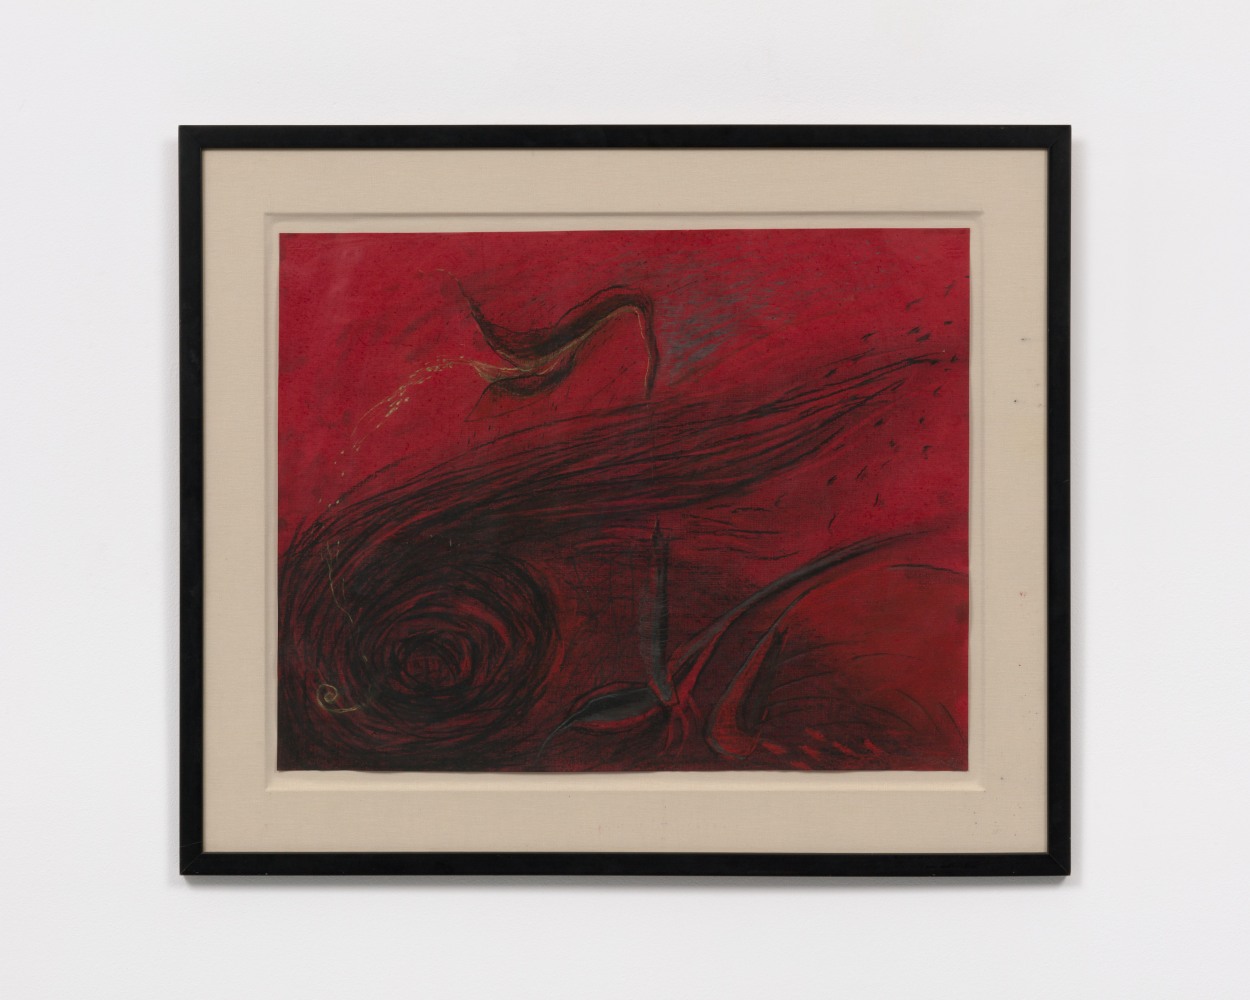 Germen de la vida-muerte/Seed of Life-Death, 1991
charcoal, graphite, and pastel on cotton rag paper hand made in India
16 x 23 1/8 in. / 40.6 x 58.7 cm